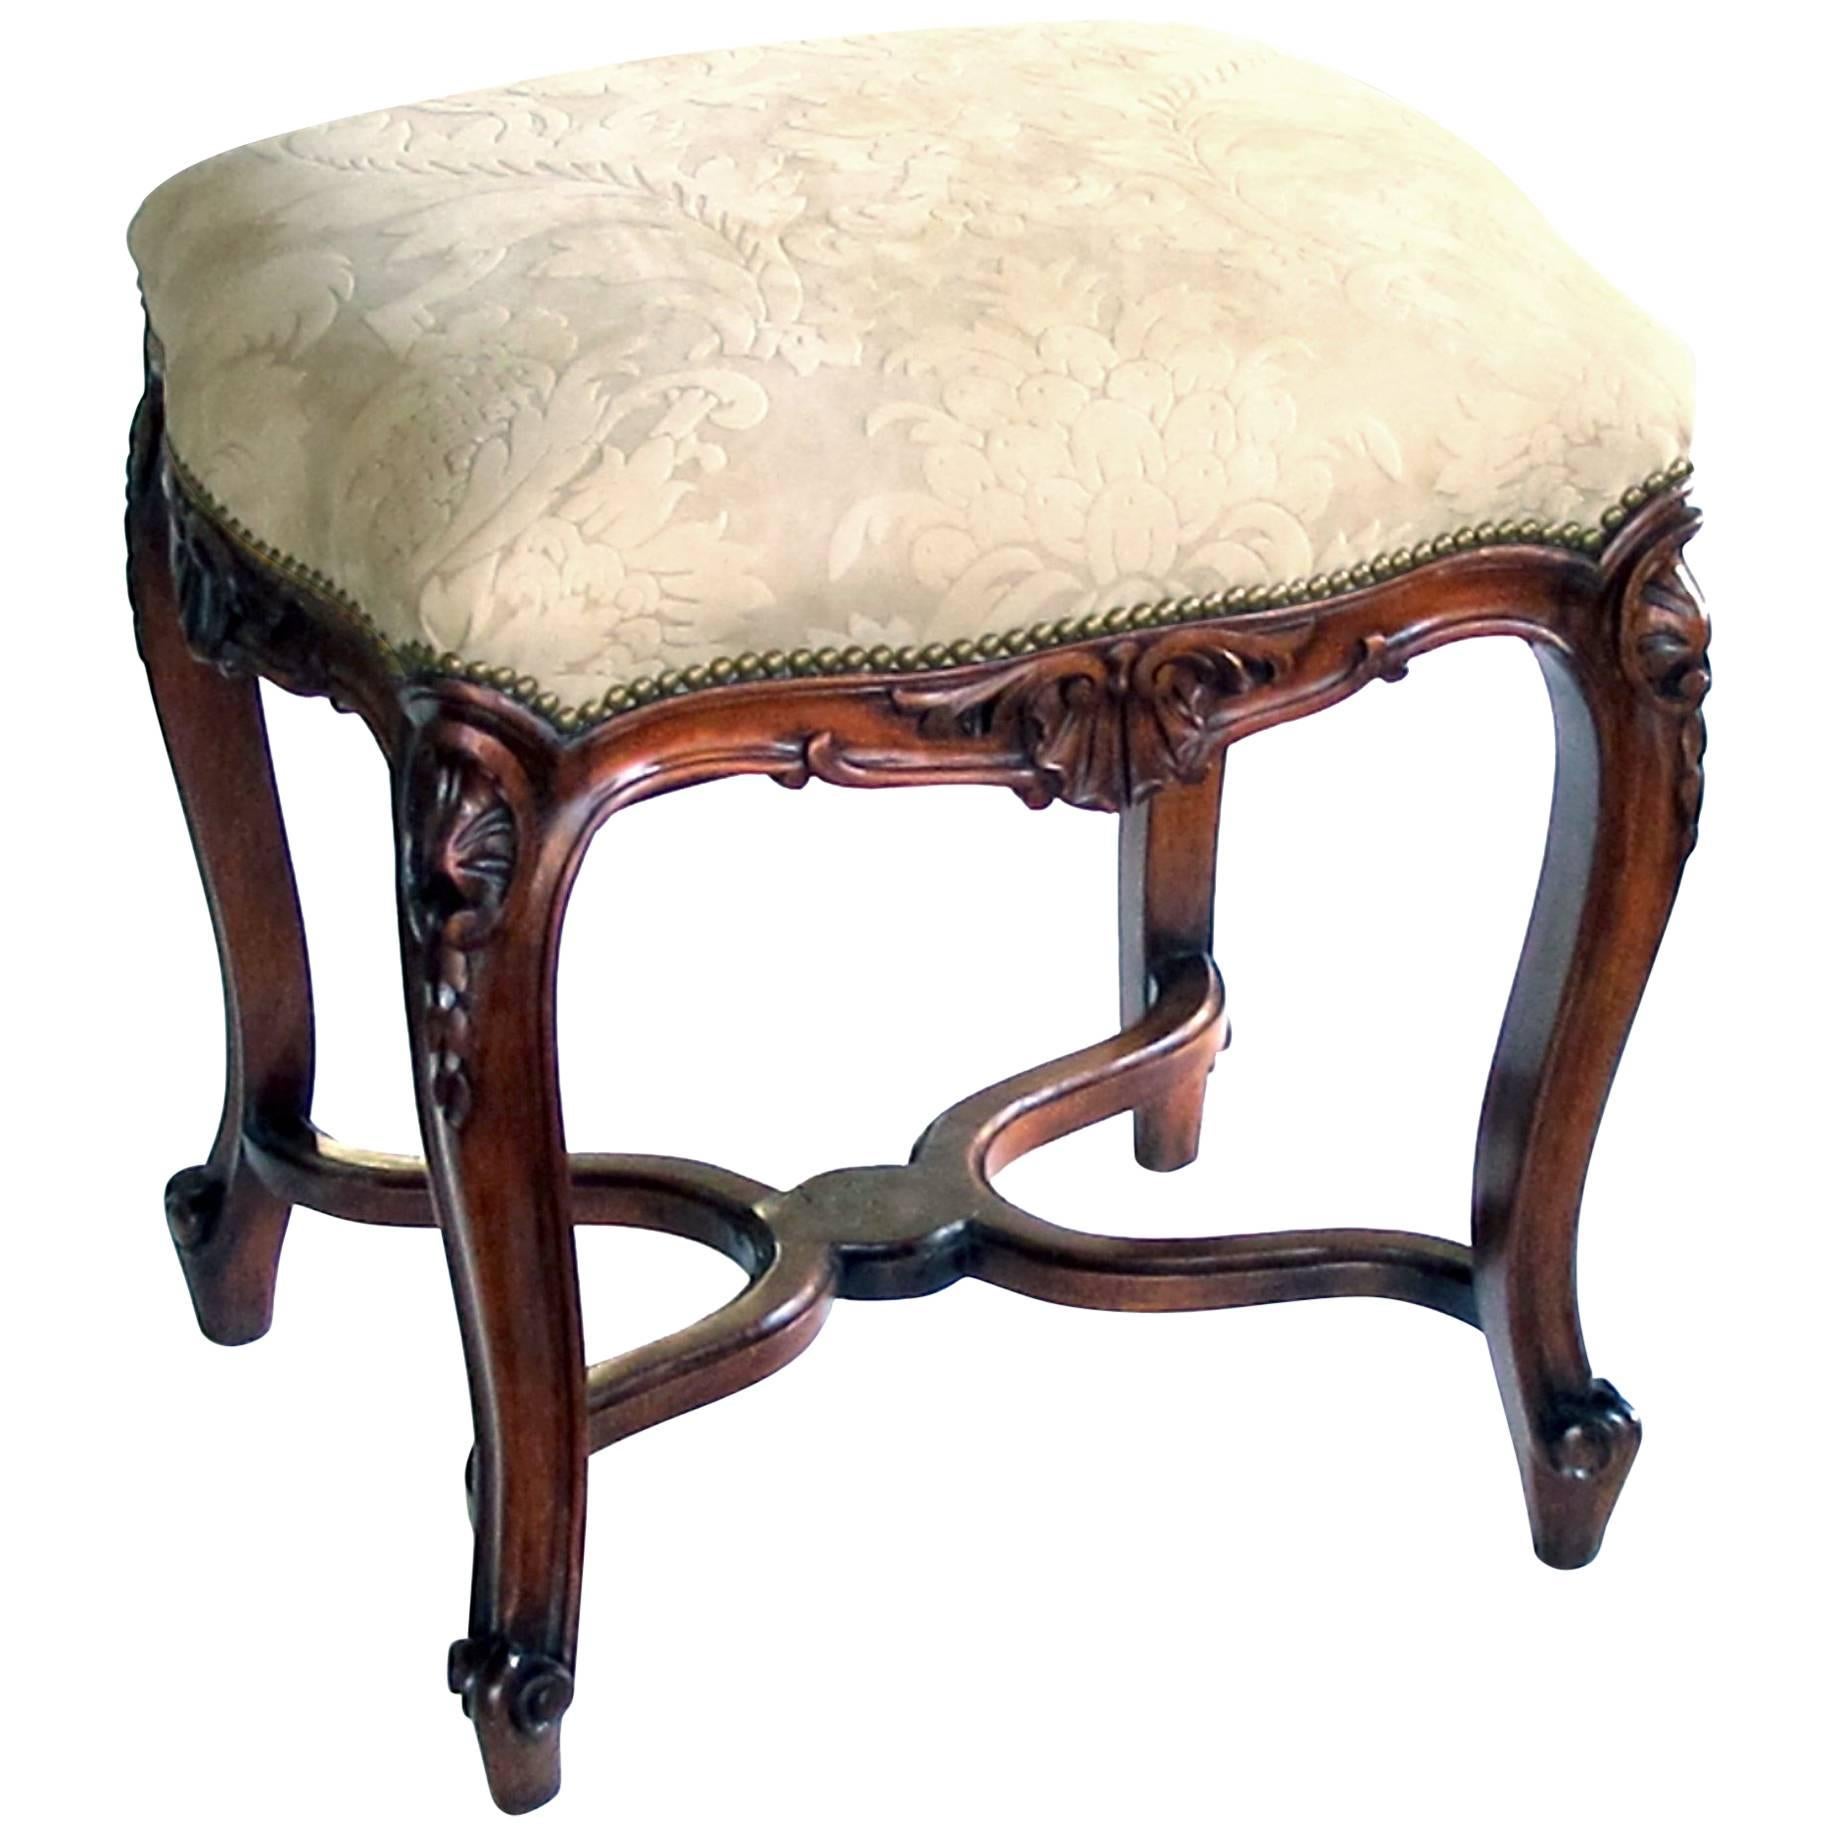 Elegant French Regence Style Carved Walnut Stool with Cut-Suede Upholstery